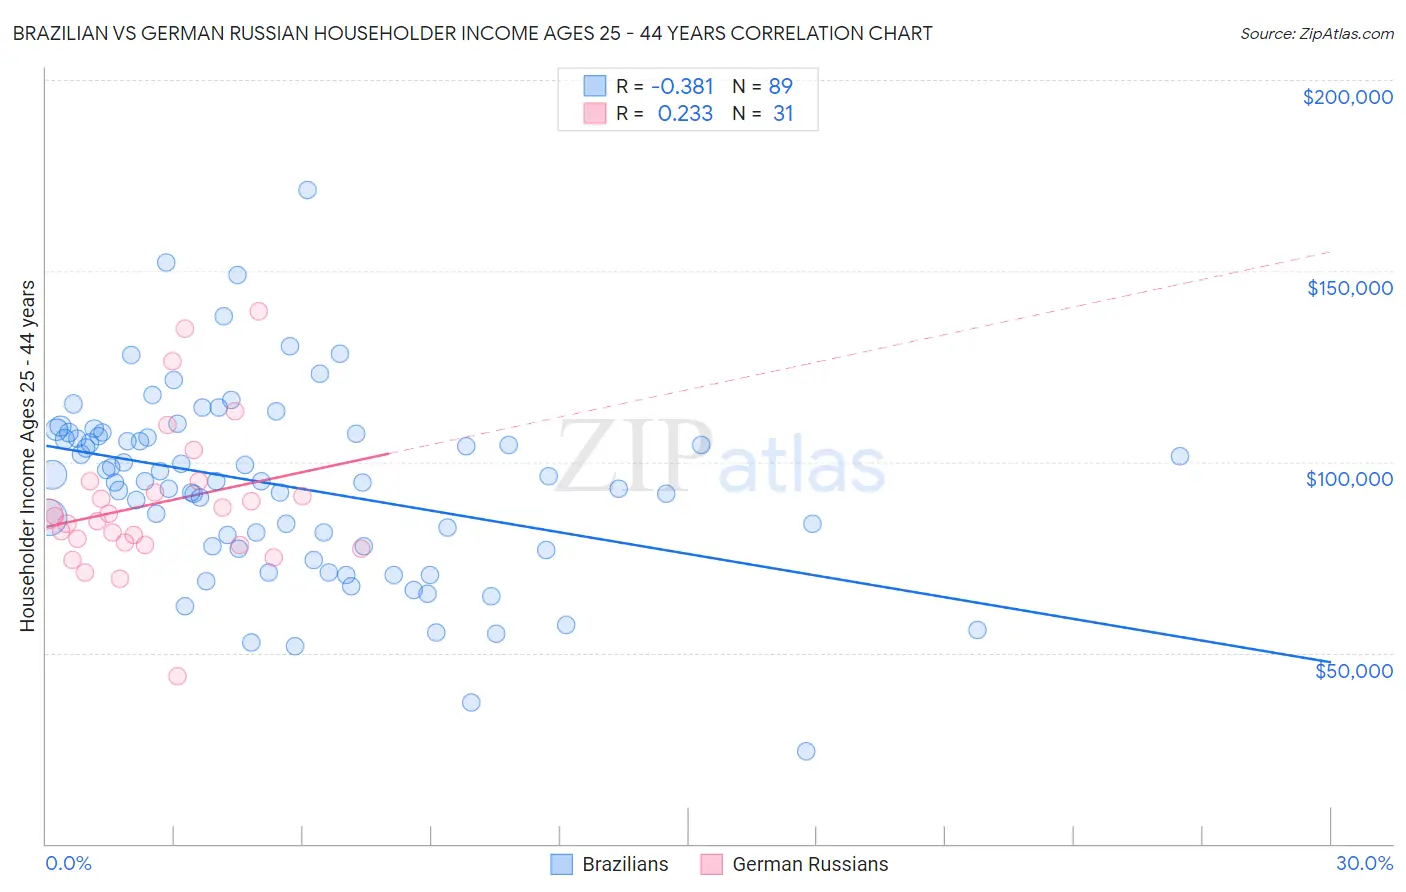 Brazilian vs German Russian Householder Income Ages 25 - 44 years